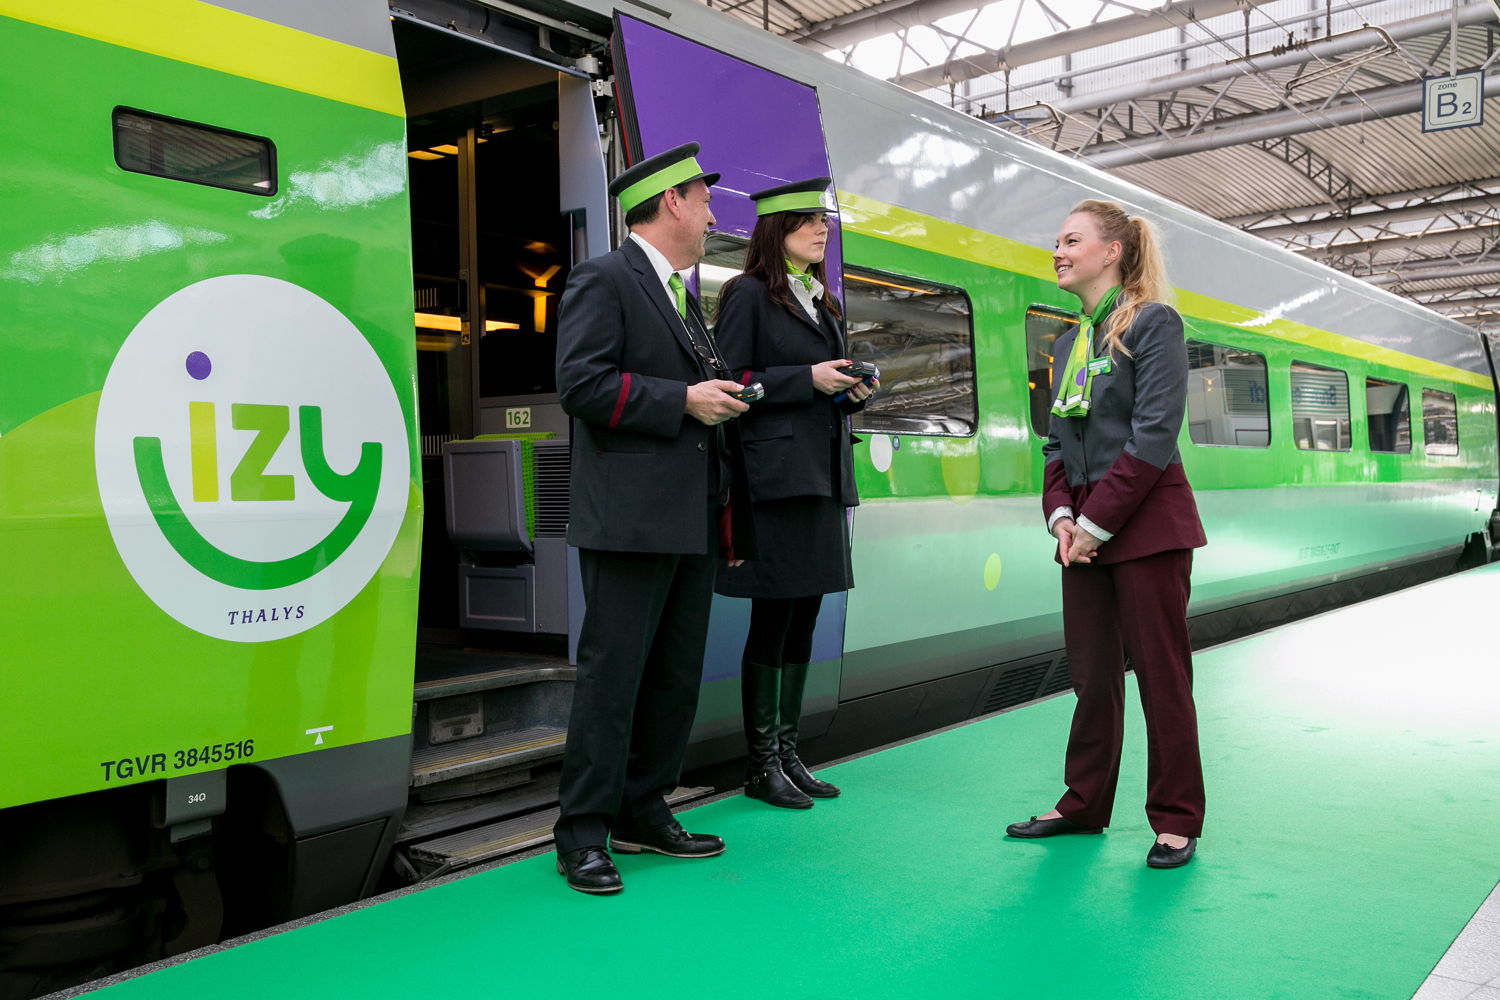 The IZY-services are provided by 100% Thalys staff, in customized uniforms. 